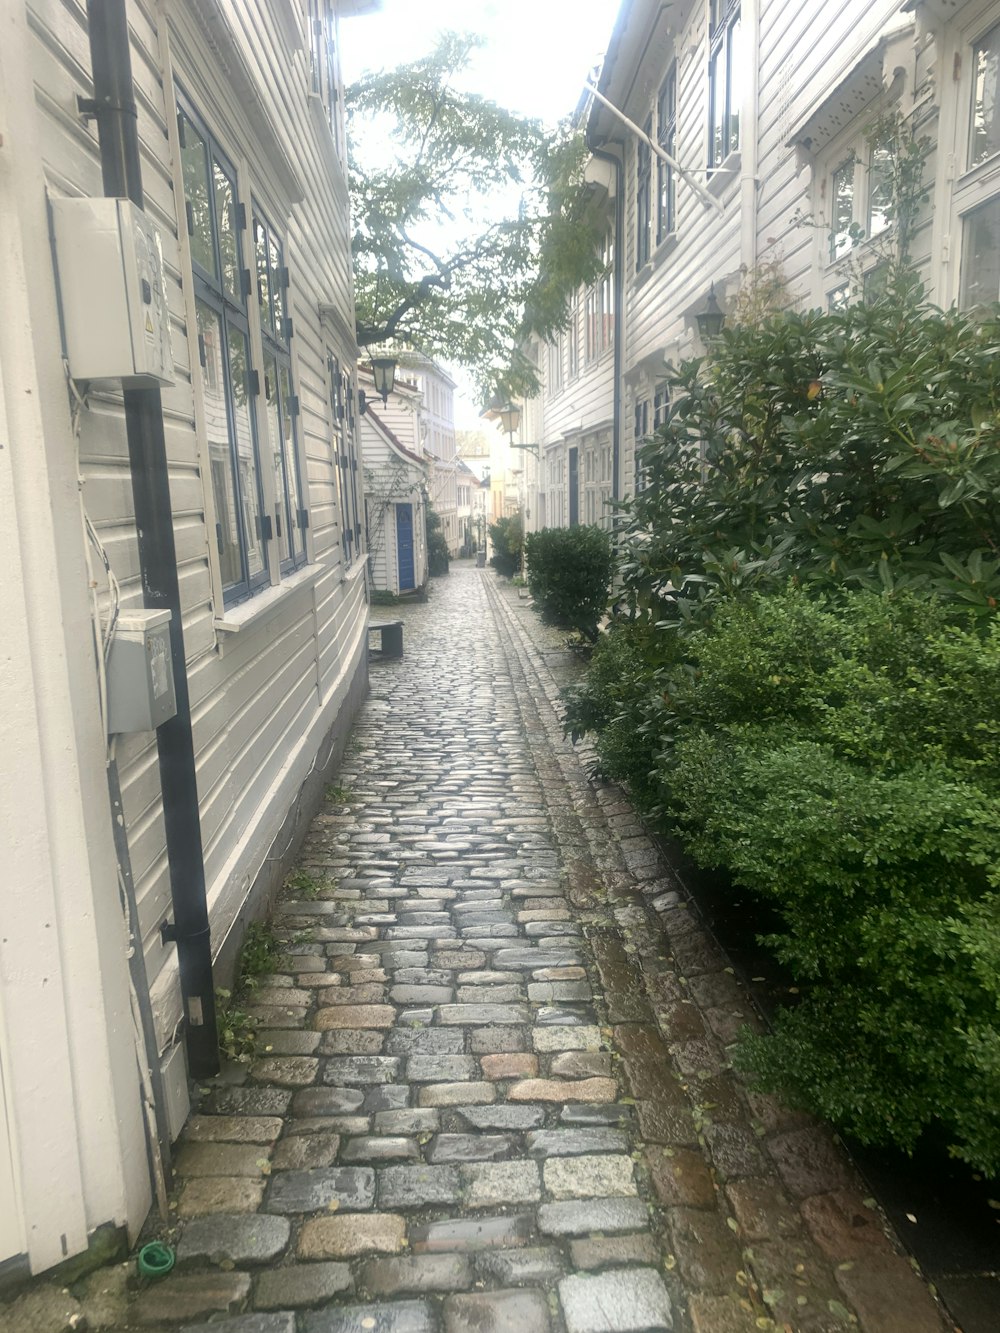 a cobblestone street in a residential area